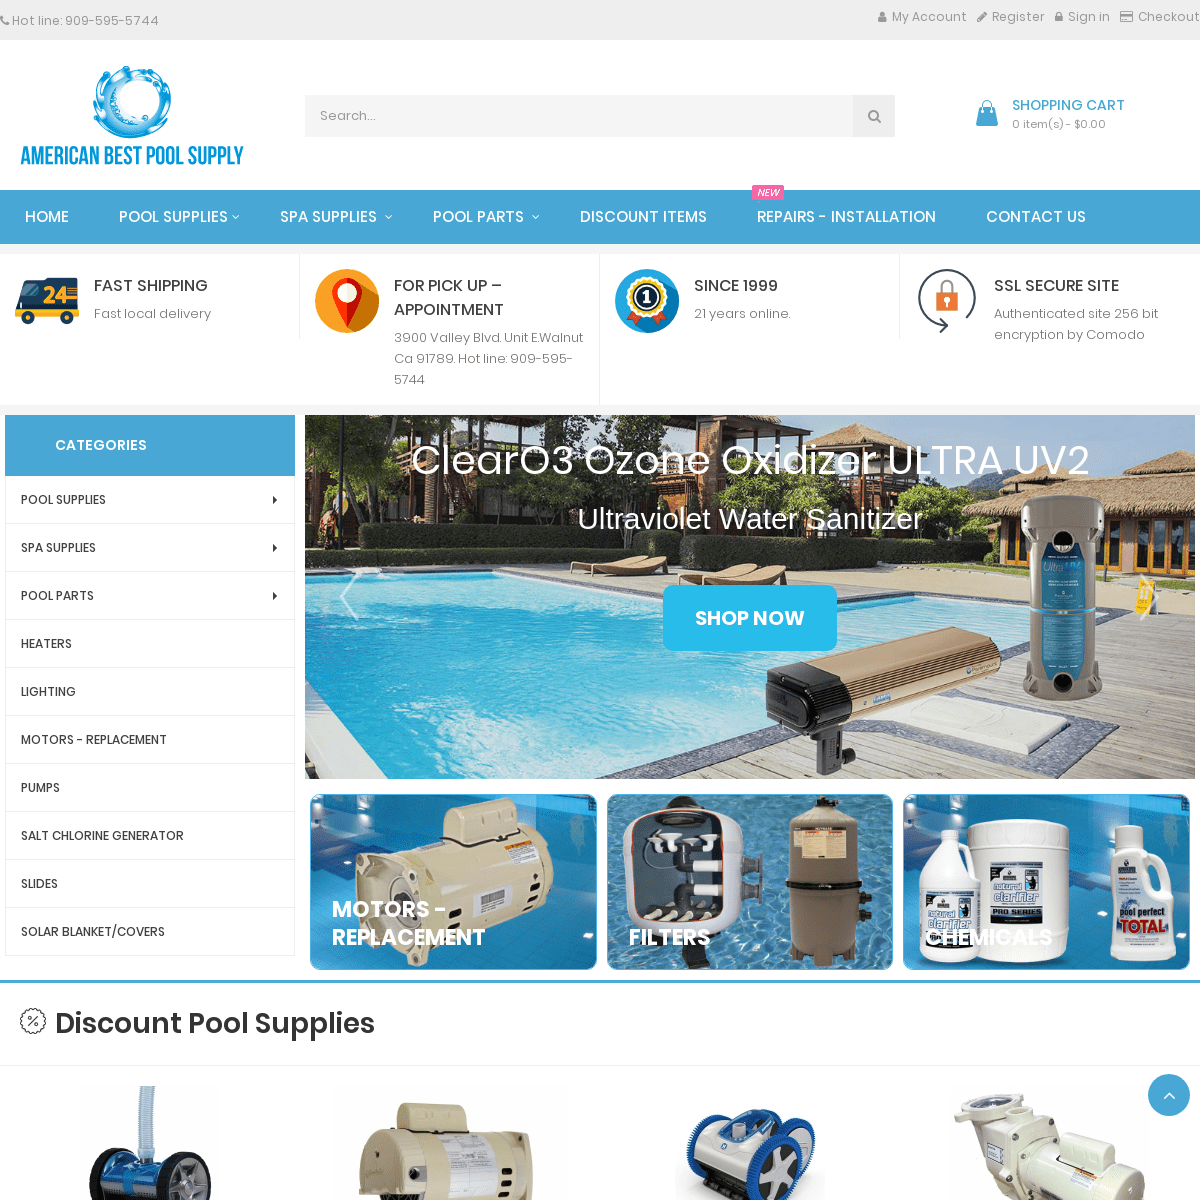 A complete backup of americanbestpoolsupply.com